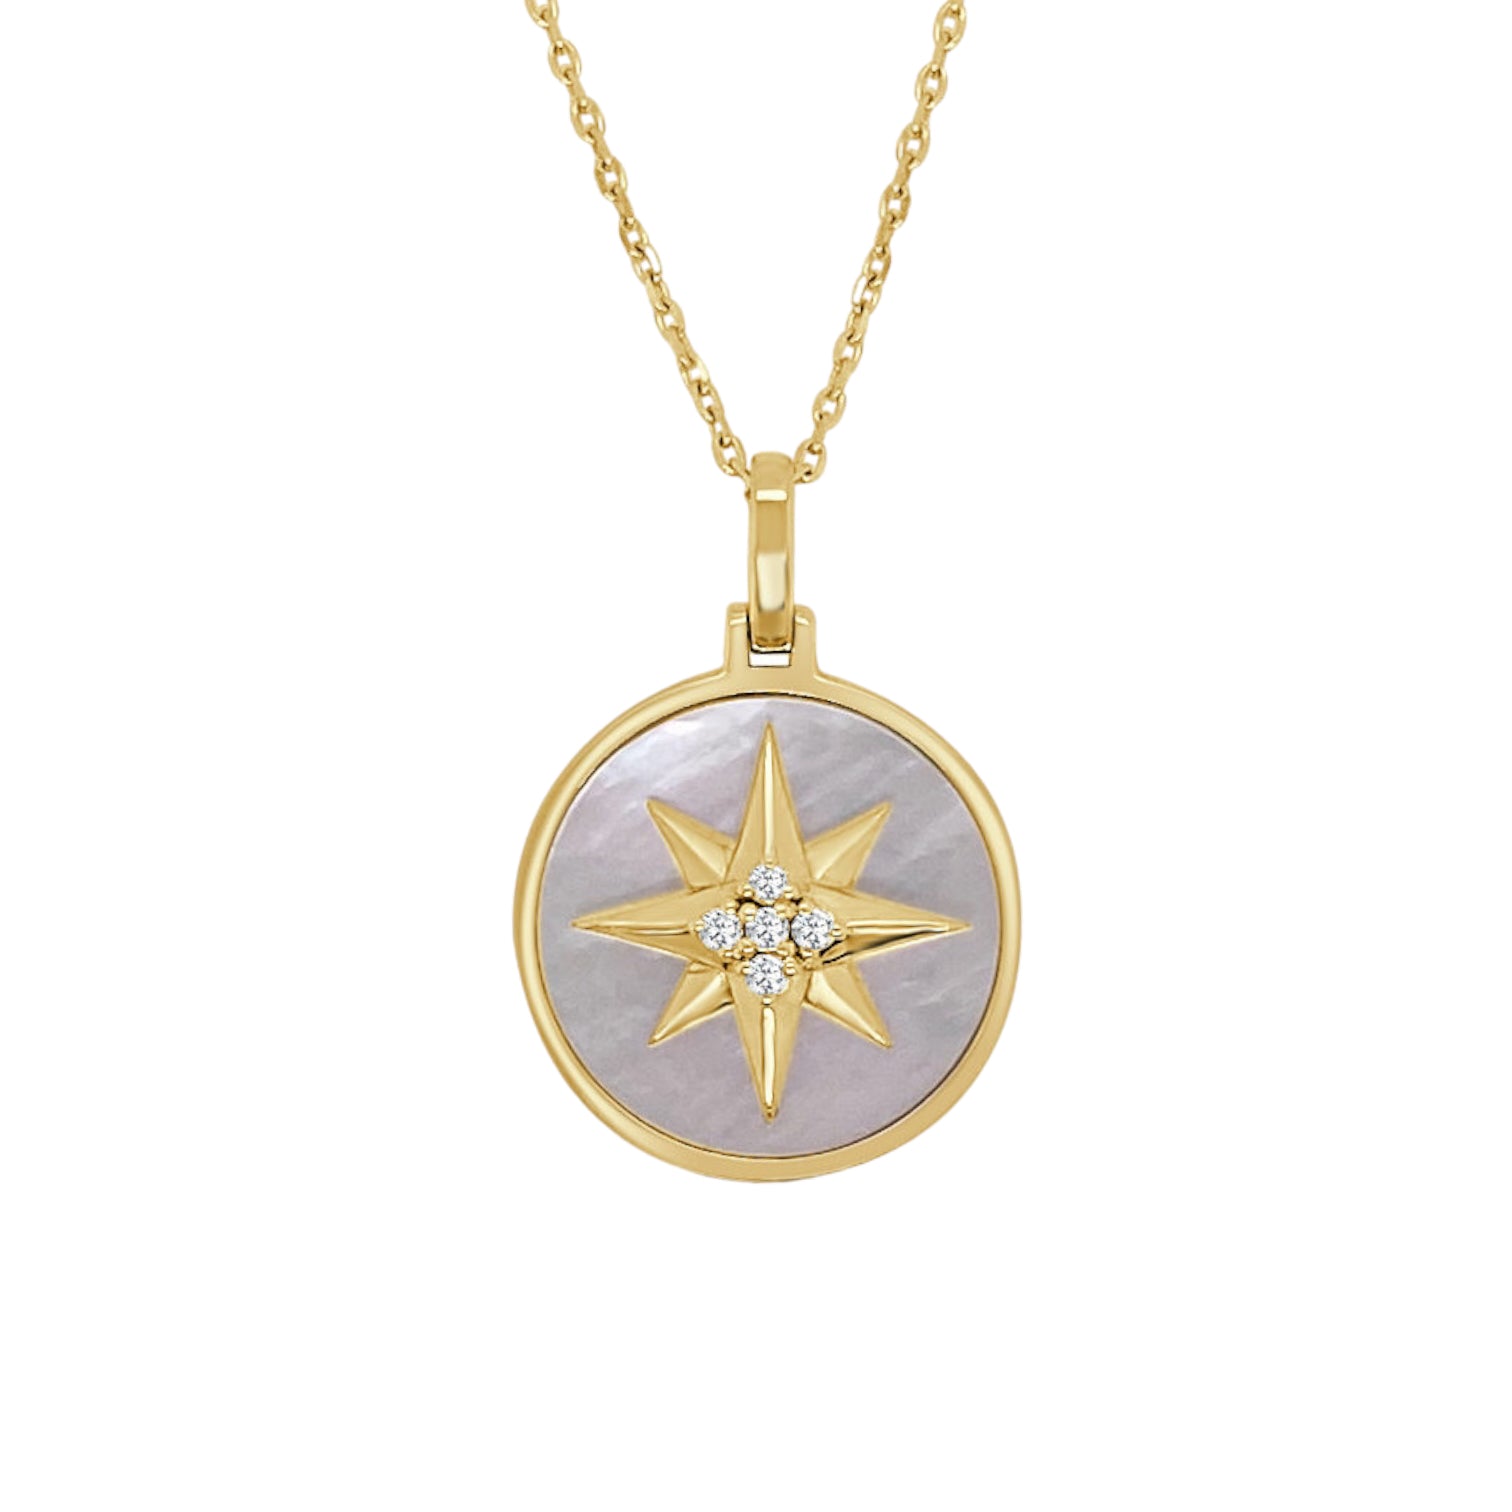 DANELIAN 14K Solid Gold Compass Pendant, North Star Compass Necklace (16  Inches Chain, 0.55 inches / 13.9mm) | Amazon.com